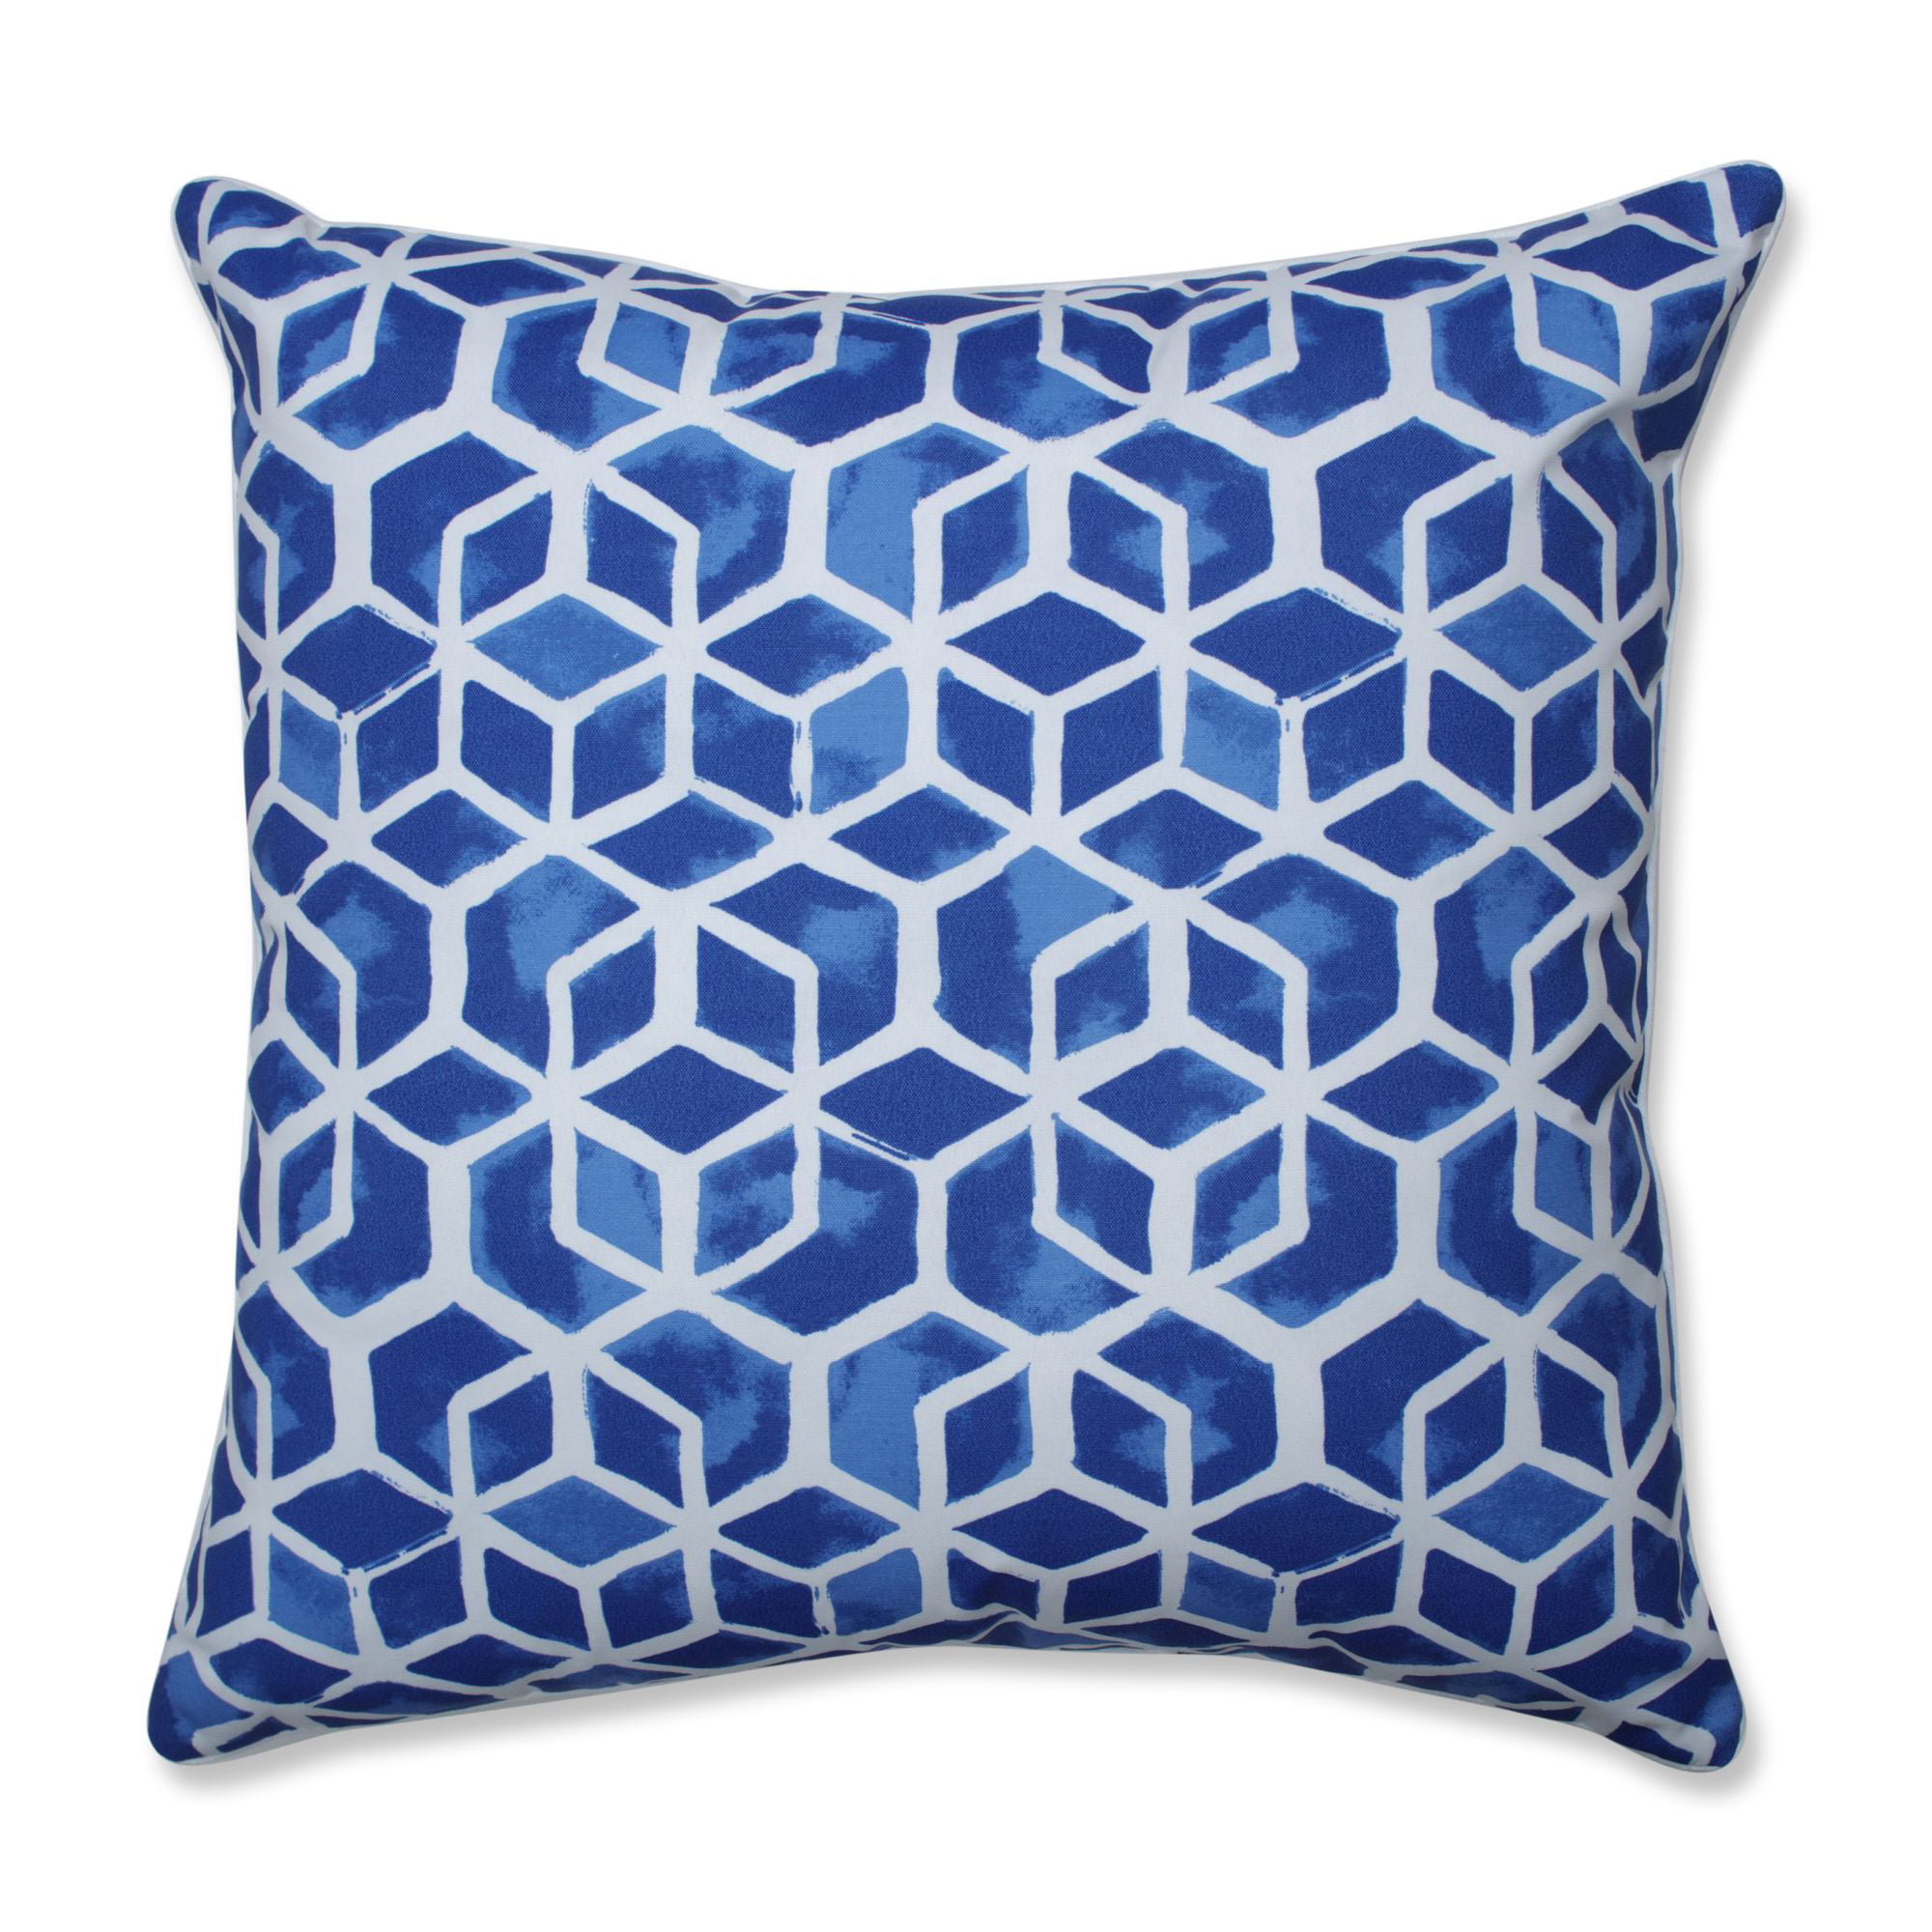 25" Blue and White Geometric UV Resistant Outdoor Patio Floor Pillows